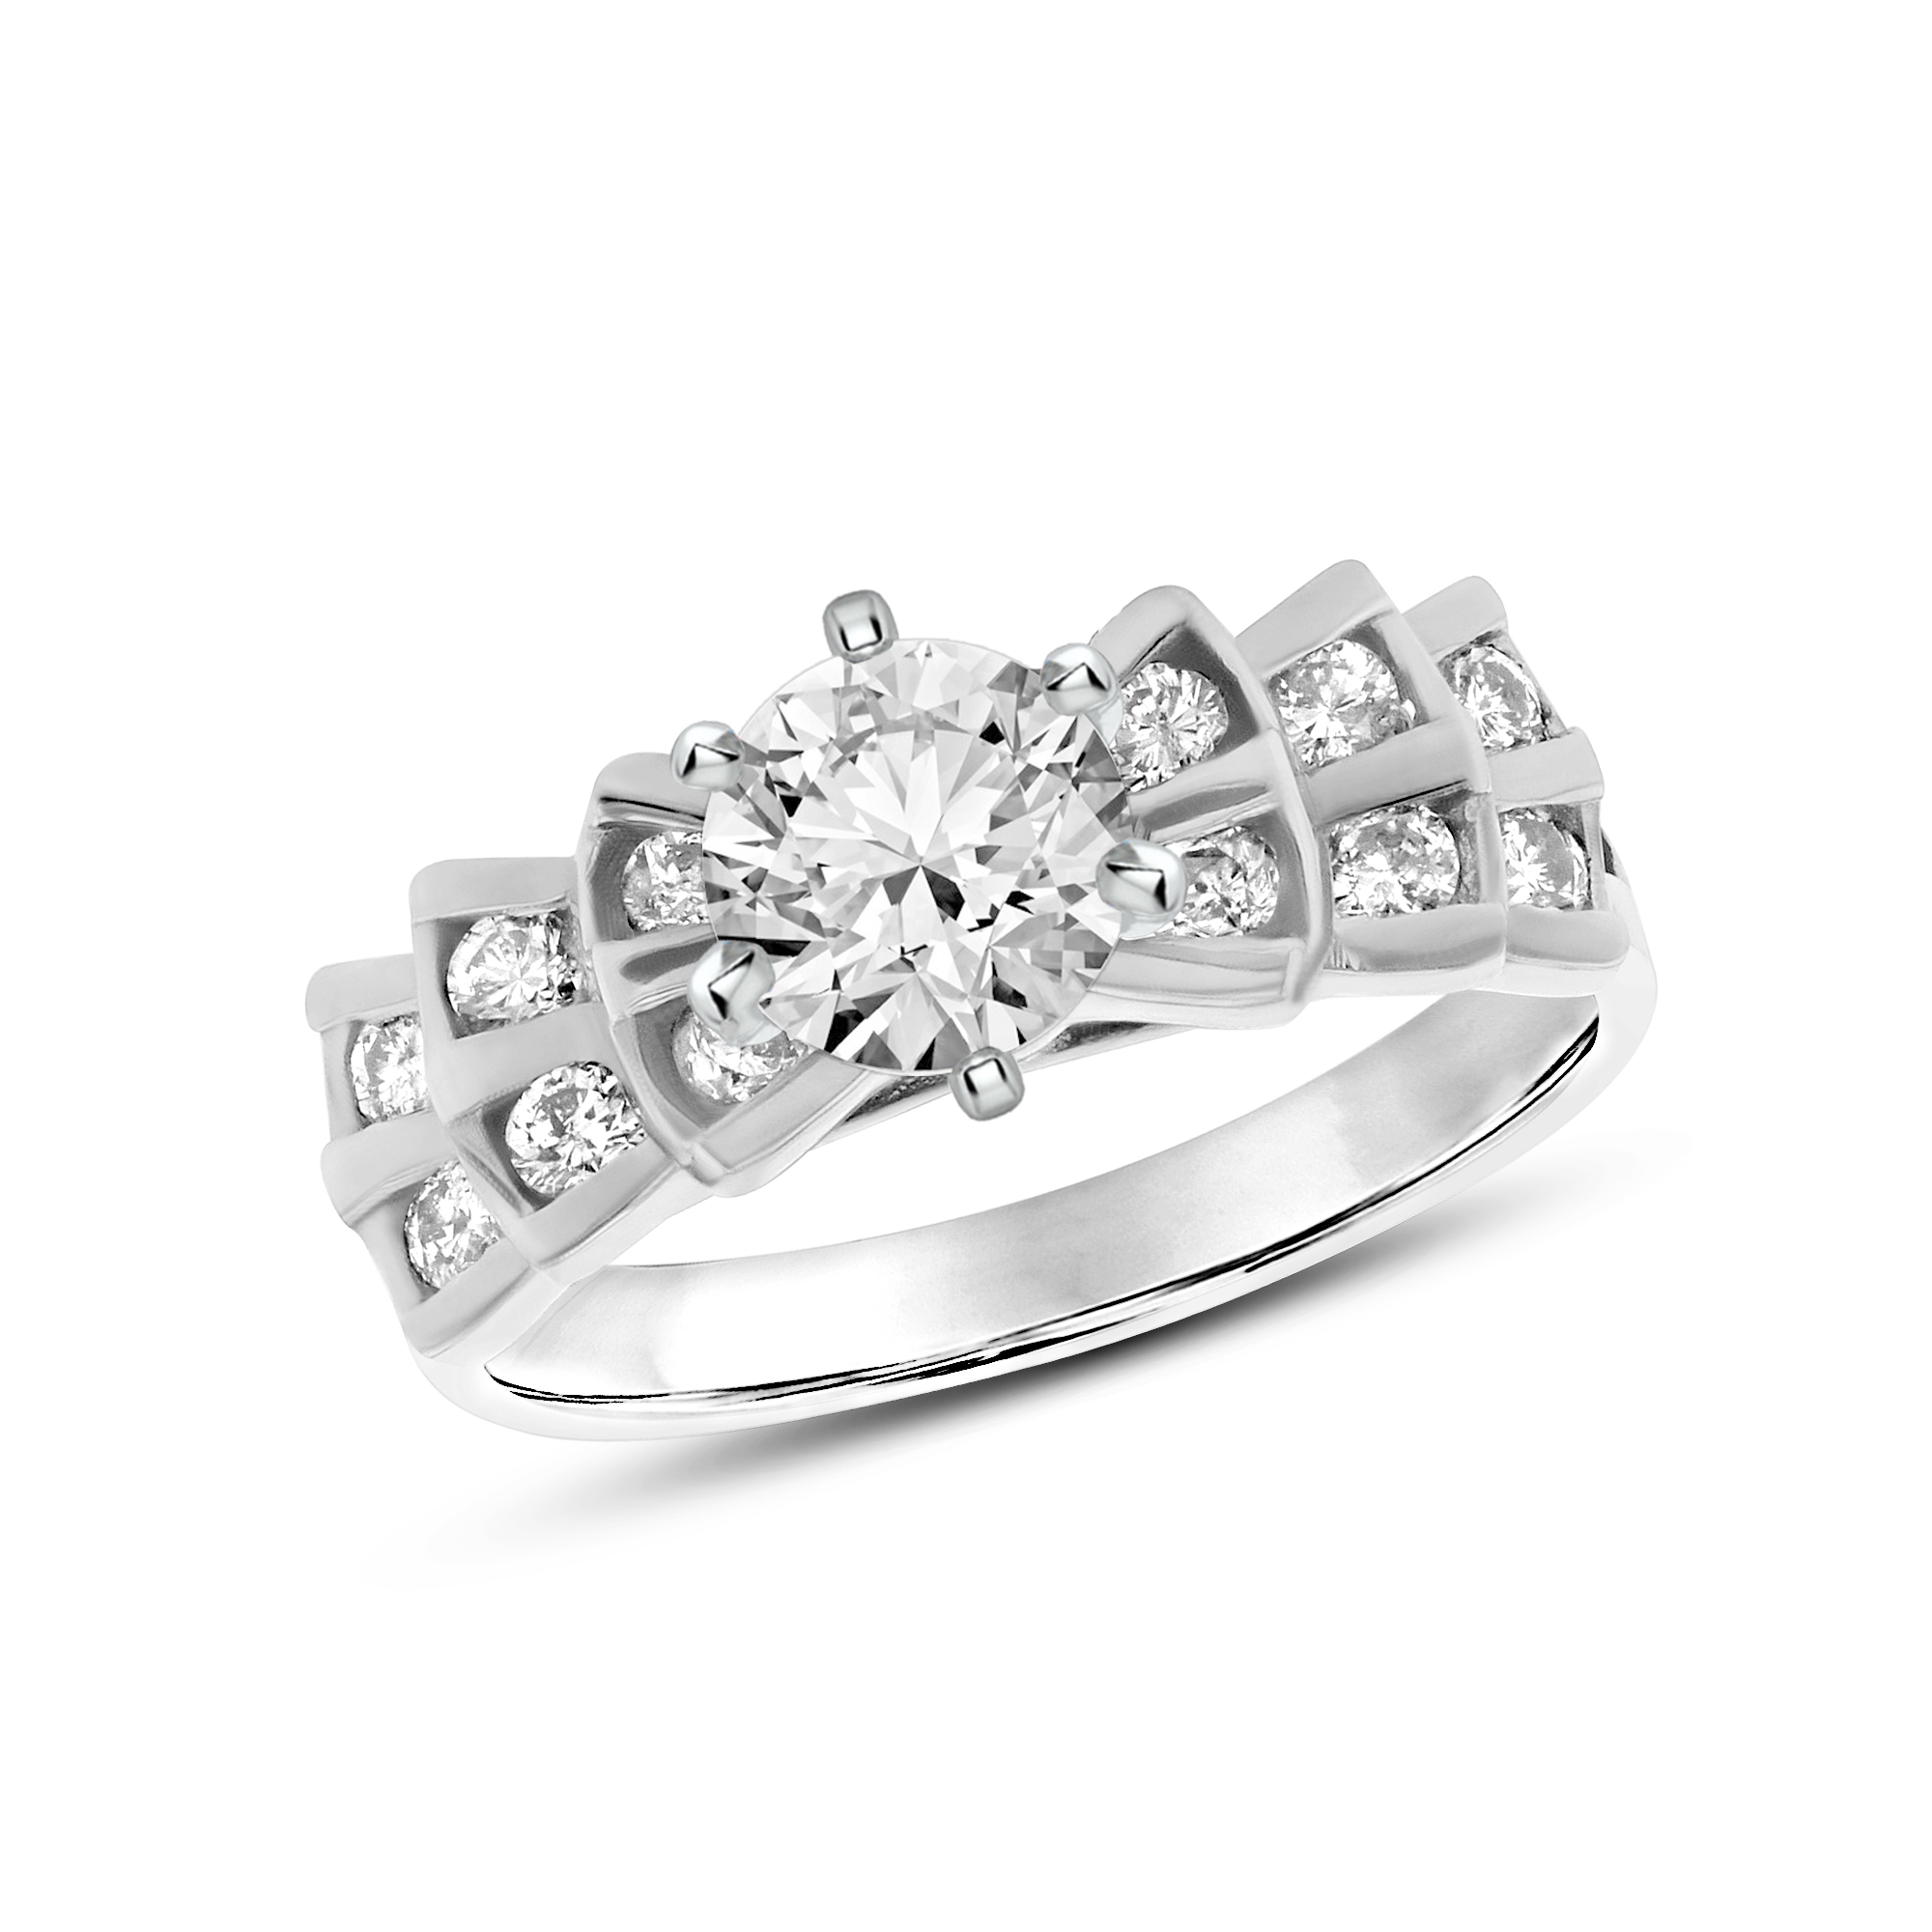 View 0.85ctw Diamond Engagement Ring in 14k White Gold